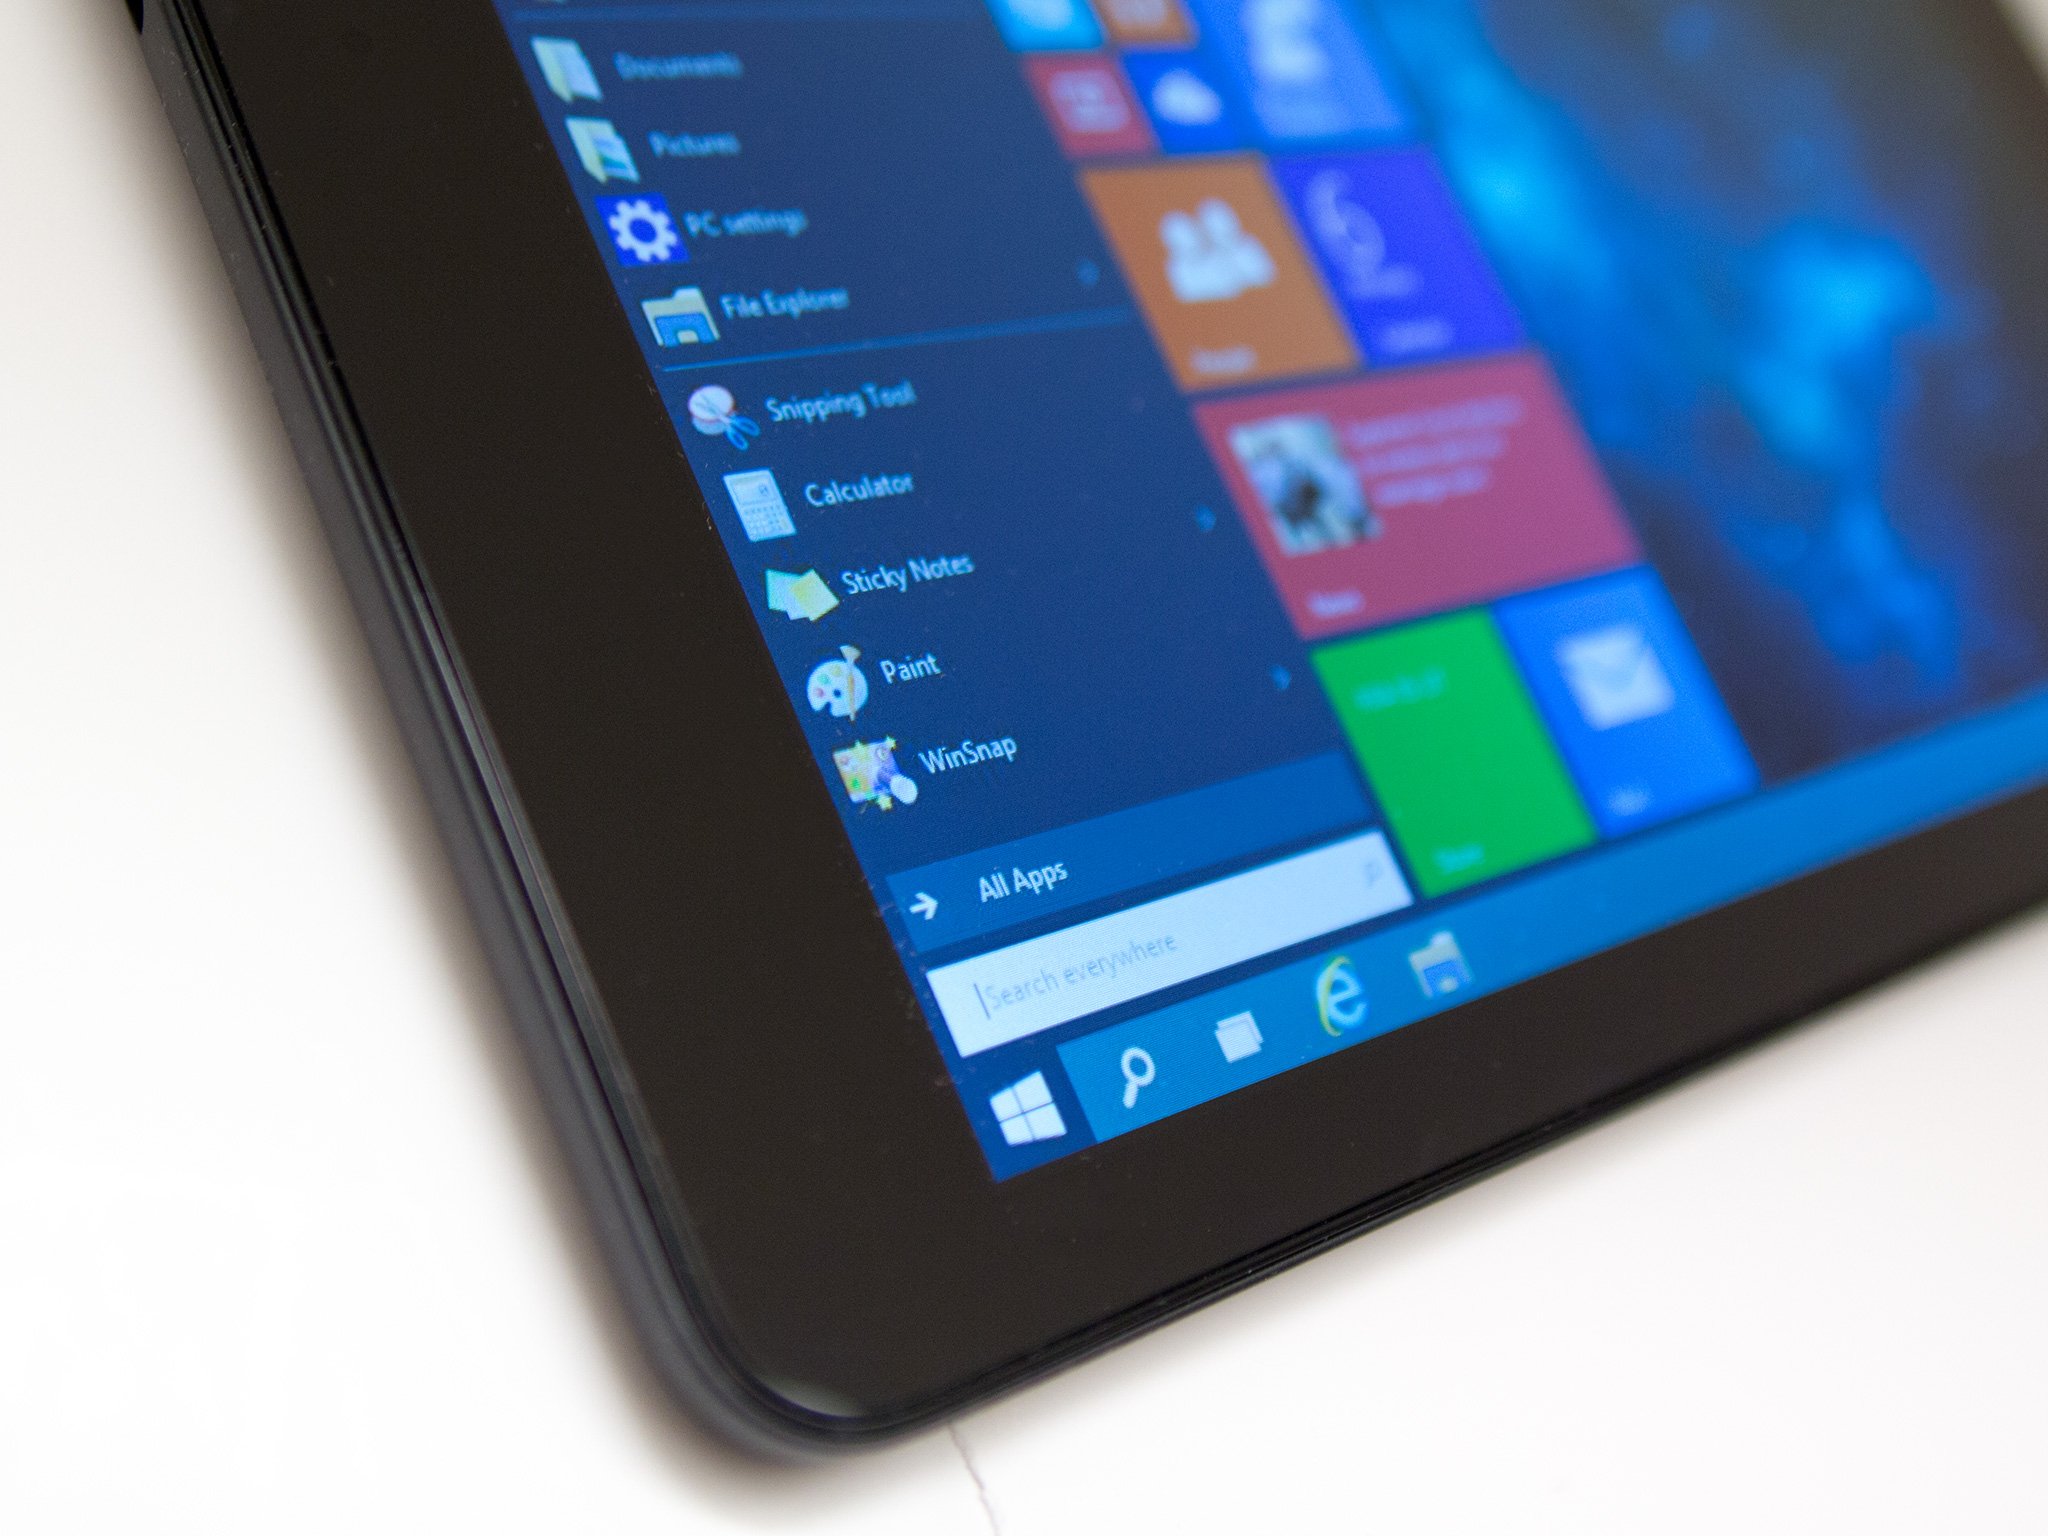 These tablets are ready for Windows 10